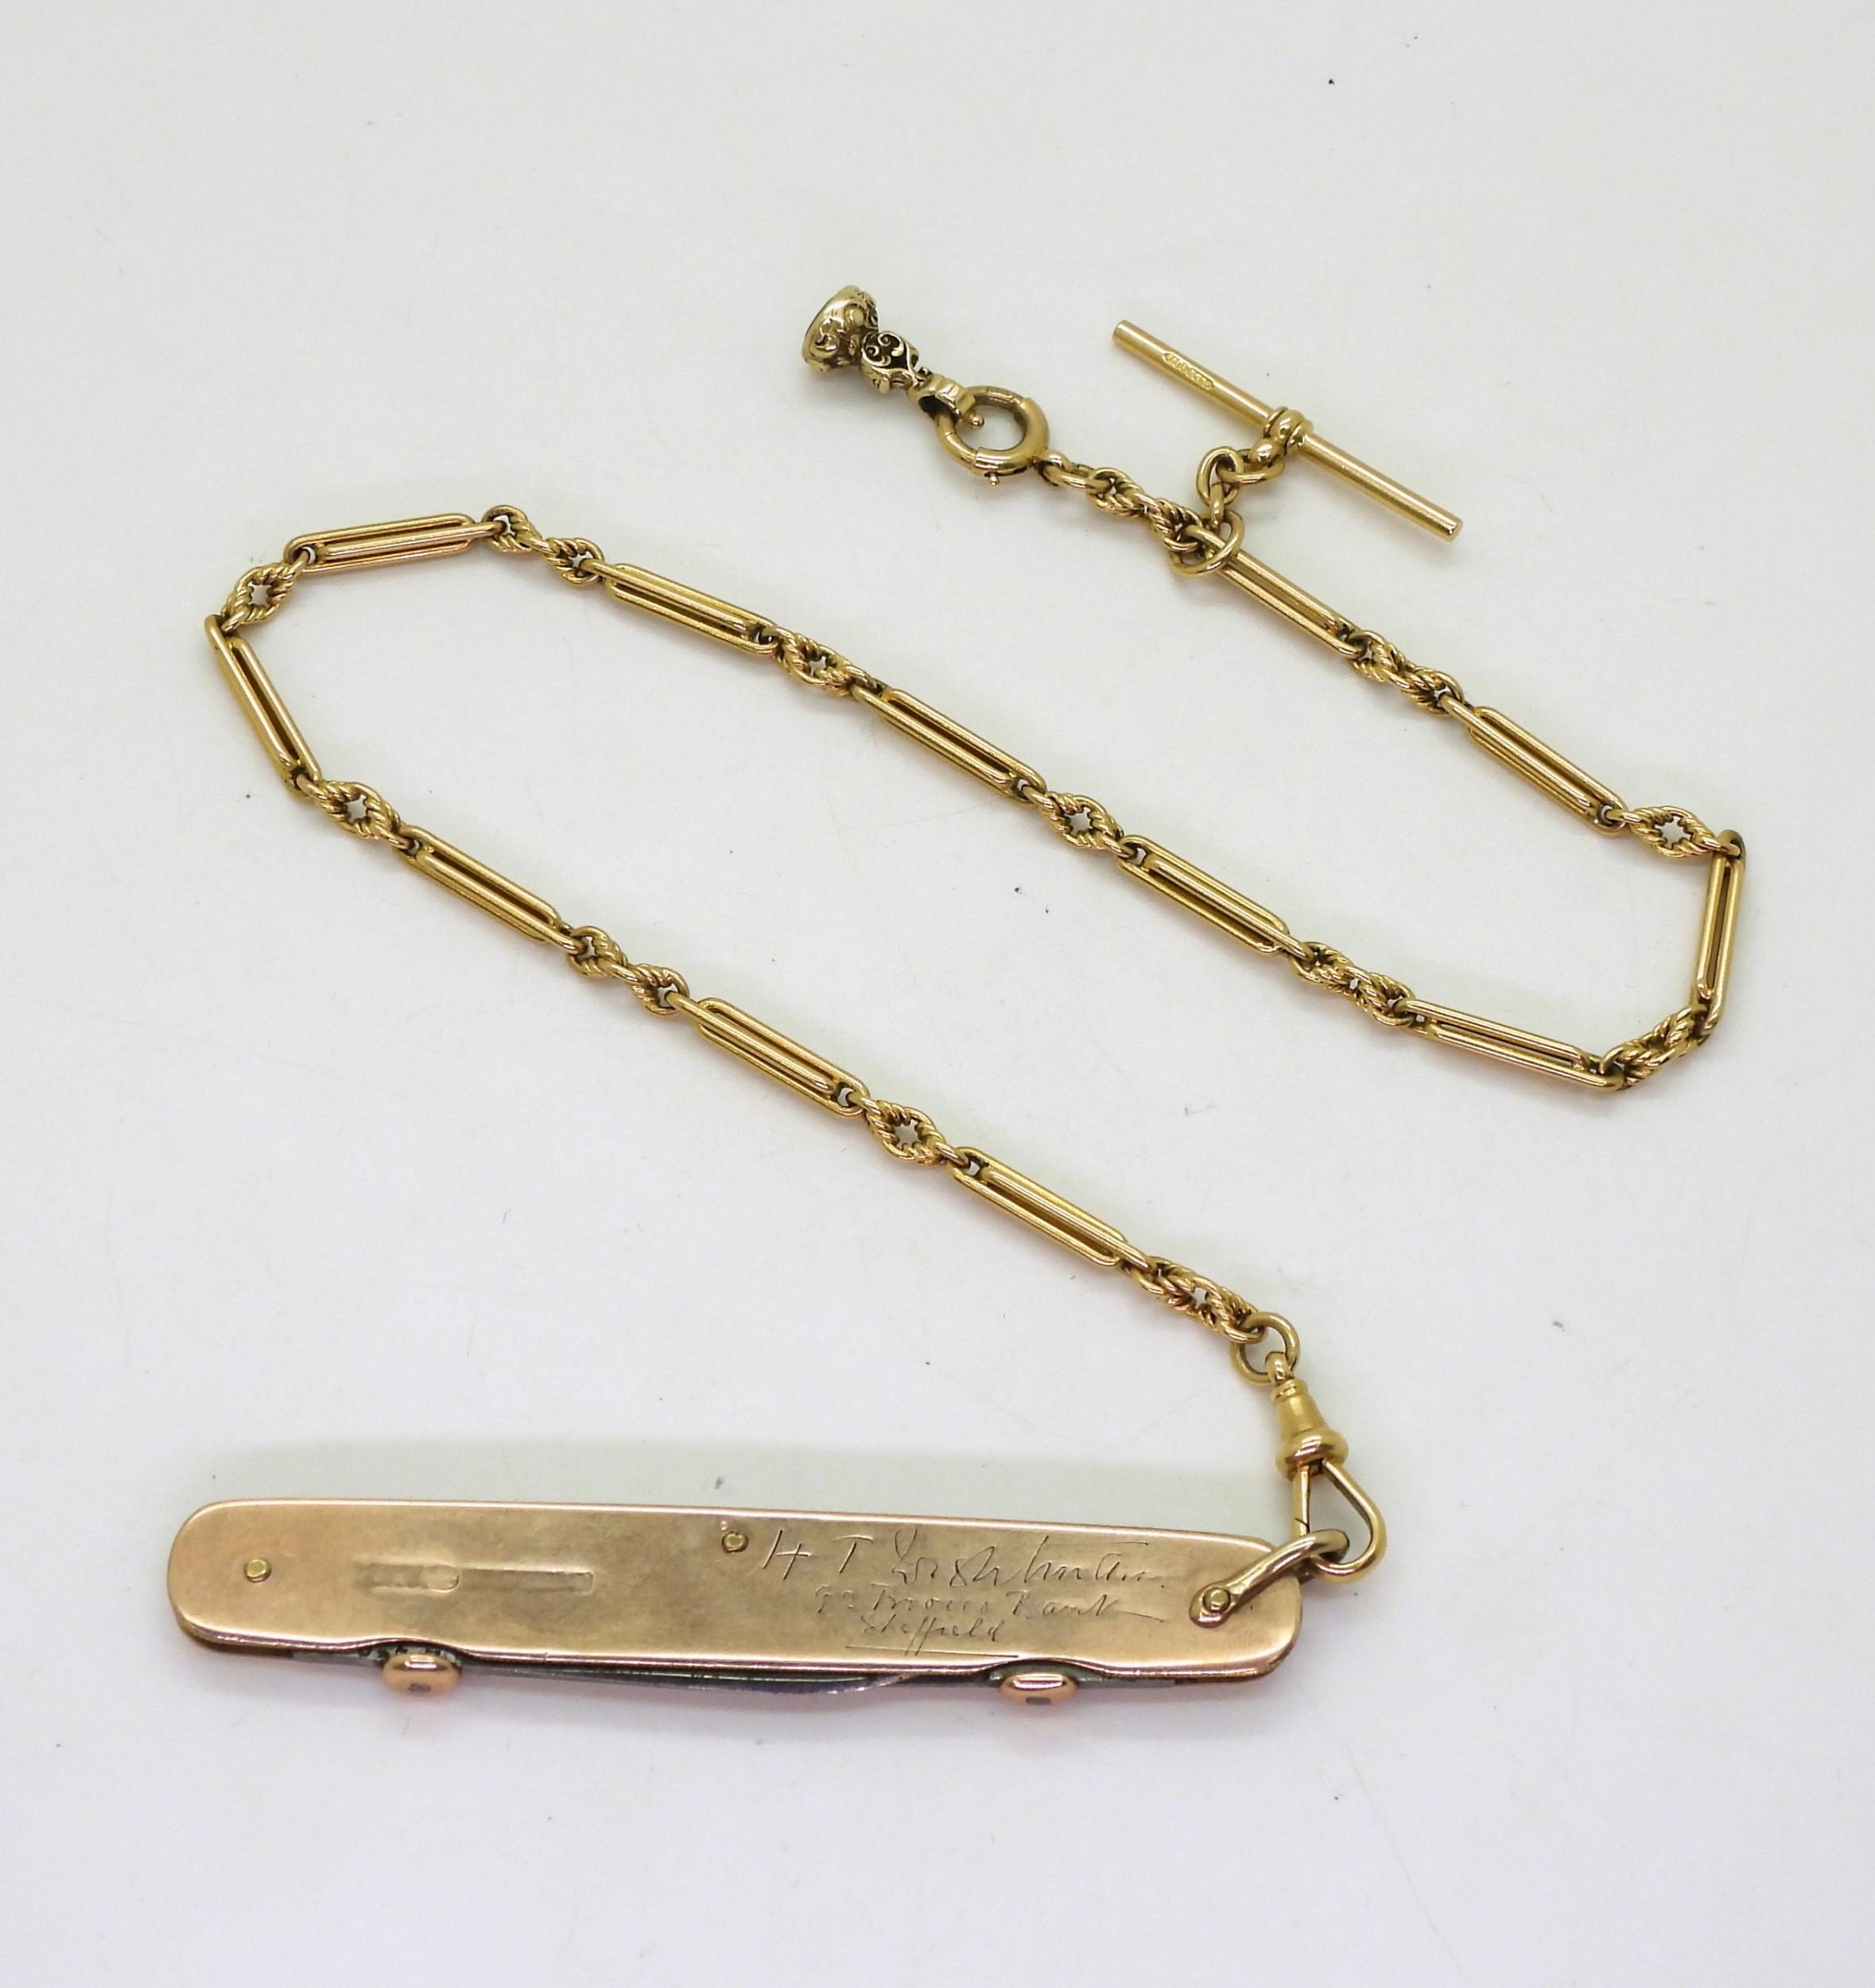 AN 18CT GOLD FOB CHAIN with baton links and fancy knot links, made by John Goffe & Son, length 34cm, - Image 2 of 5